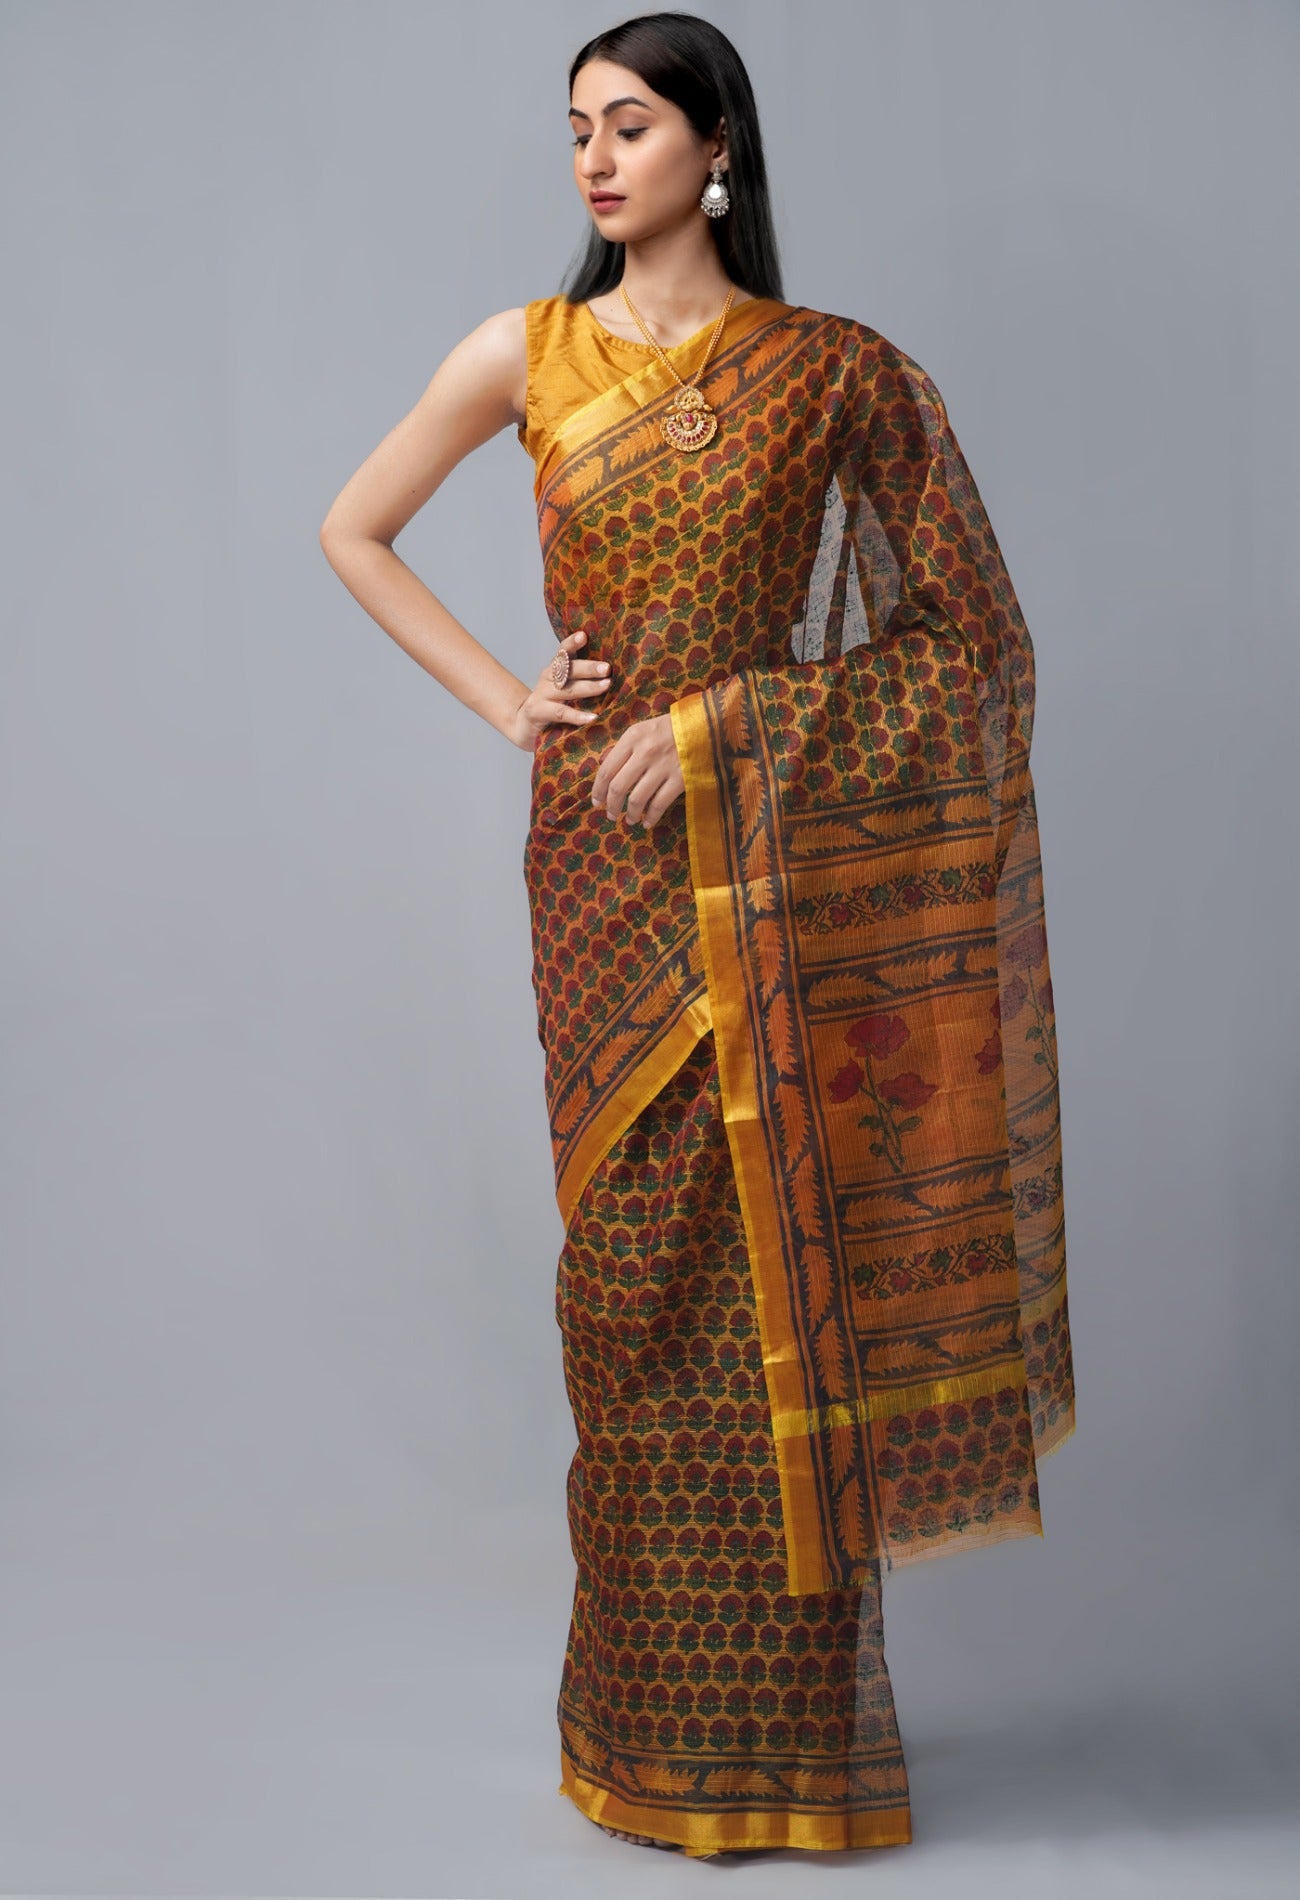 Online Shopping for Yellow Pure Kota Hand Block Print Silk Saree with Hand Block Prints from Rajasthan at Unnatisilks.com India
